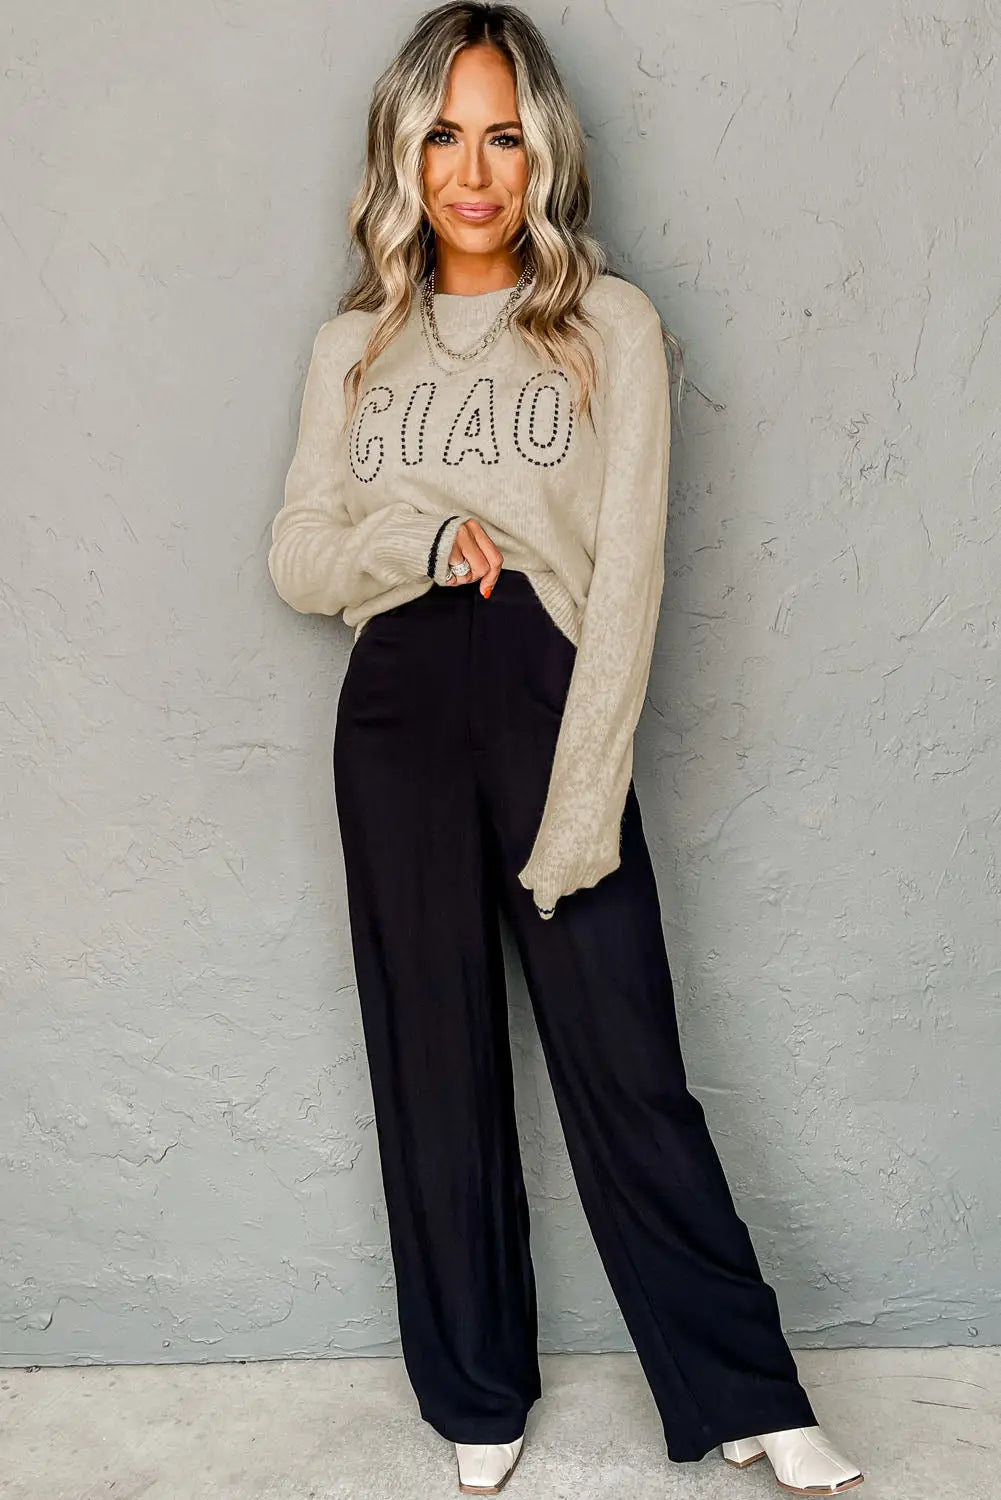 Oatmeal ciao letter graphic crew neck sweater - sweaters & cardigans